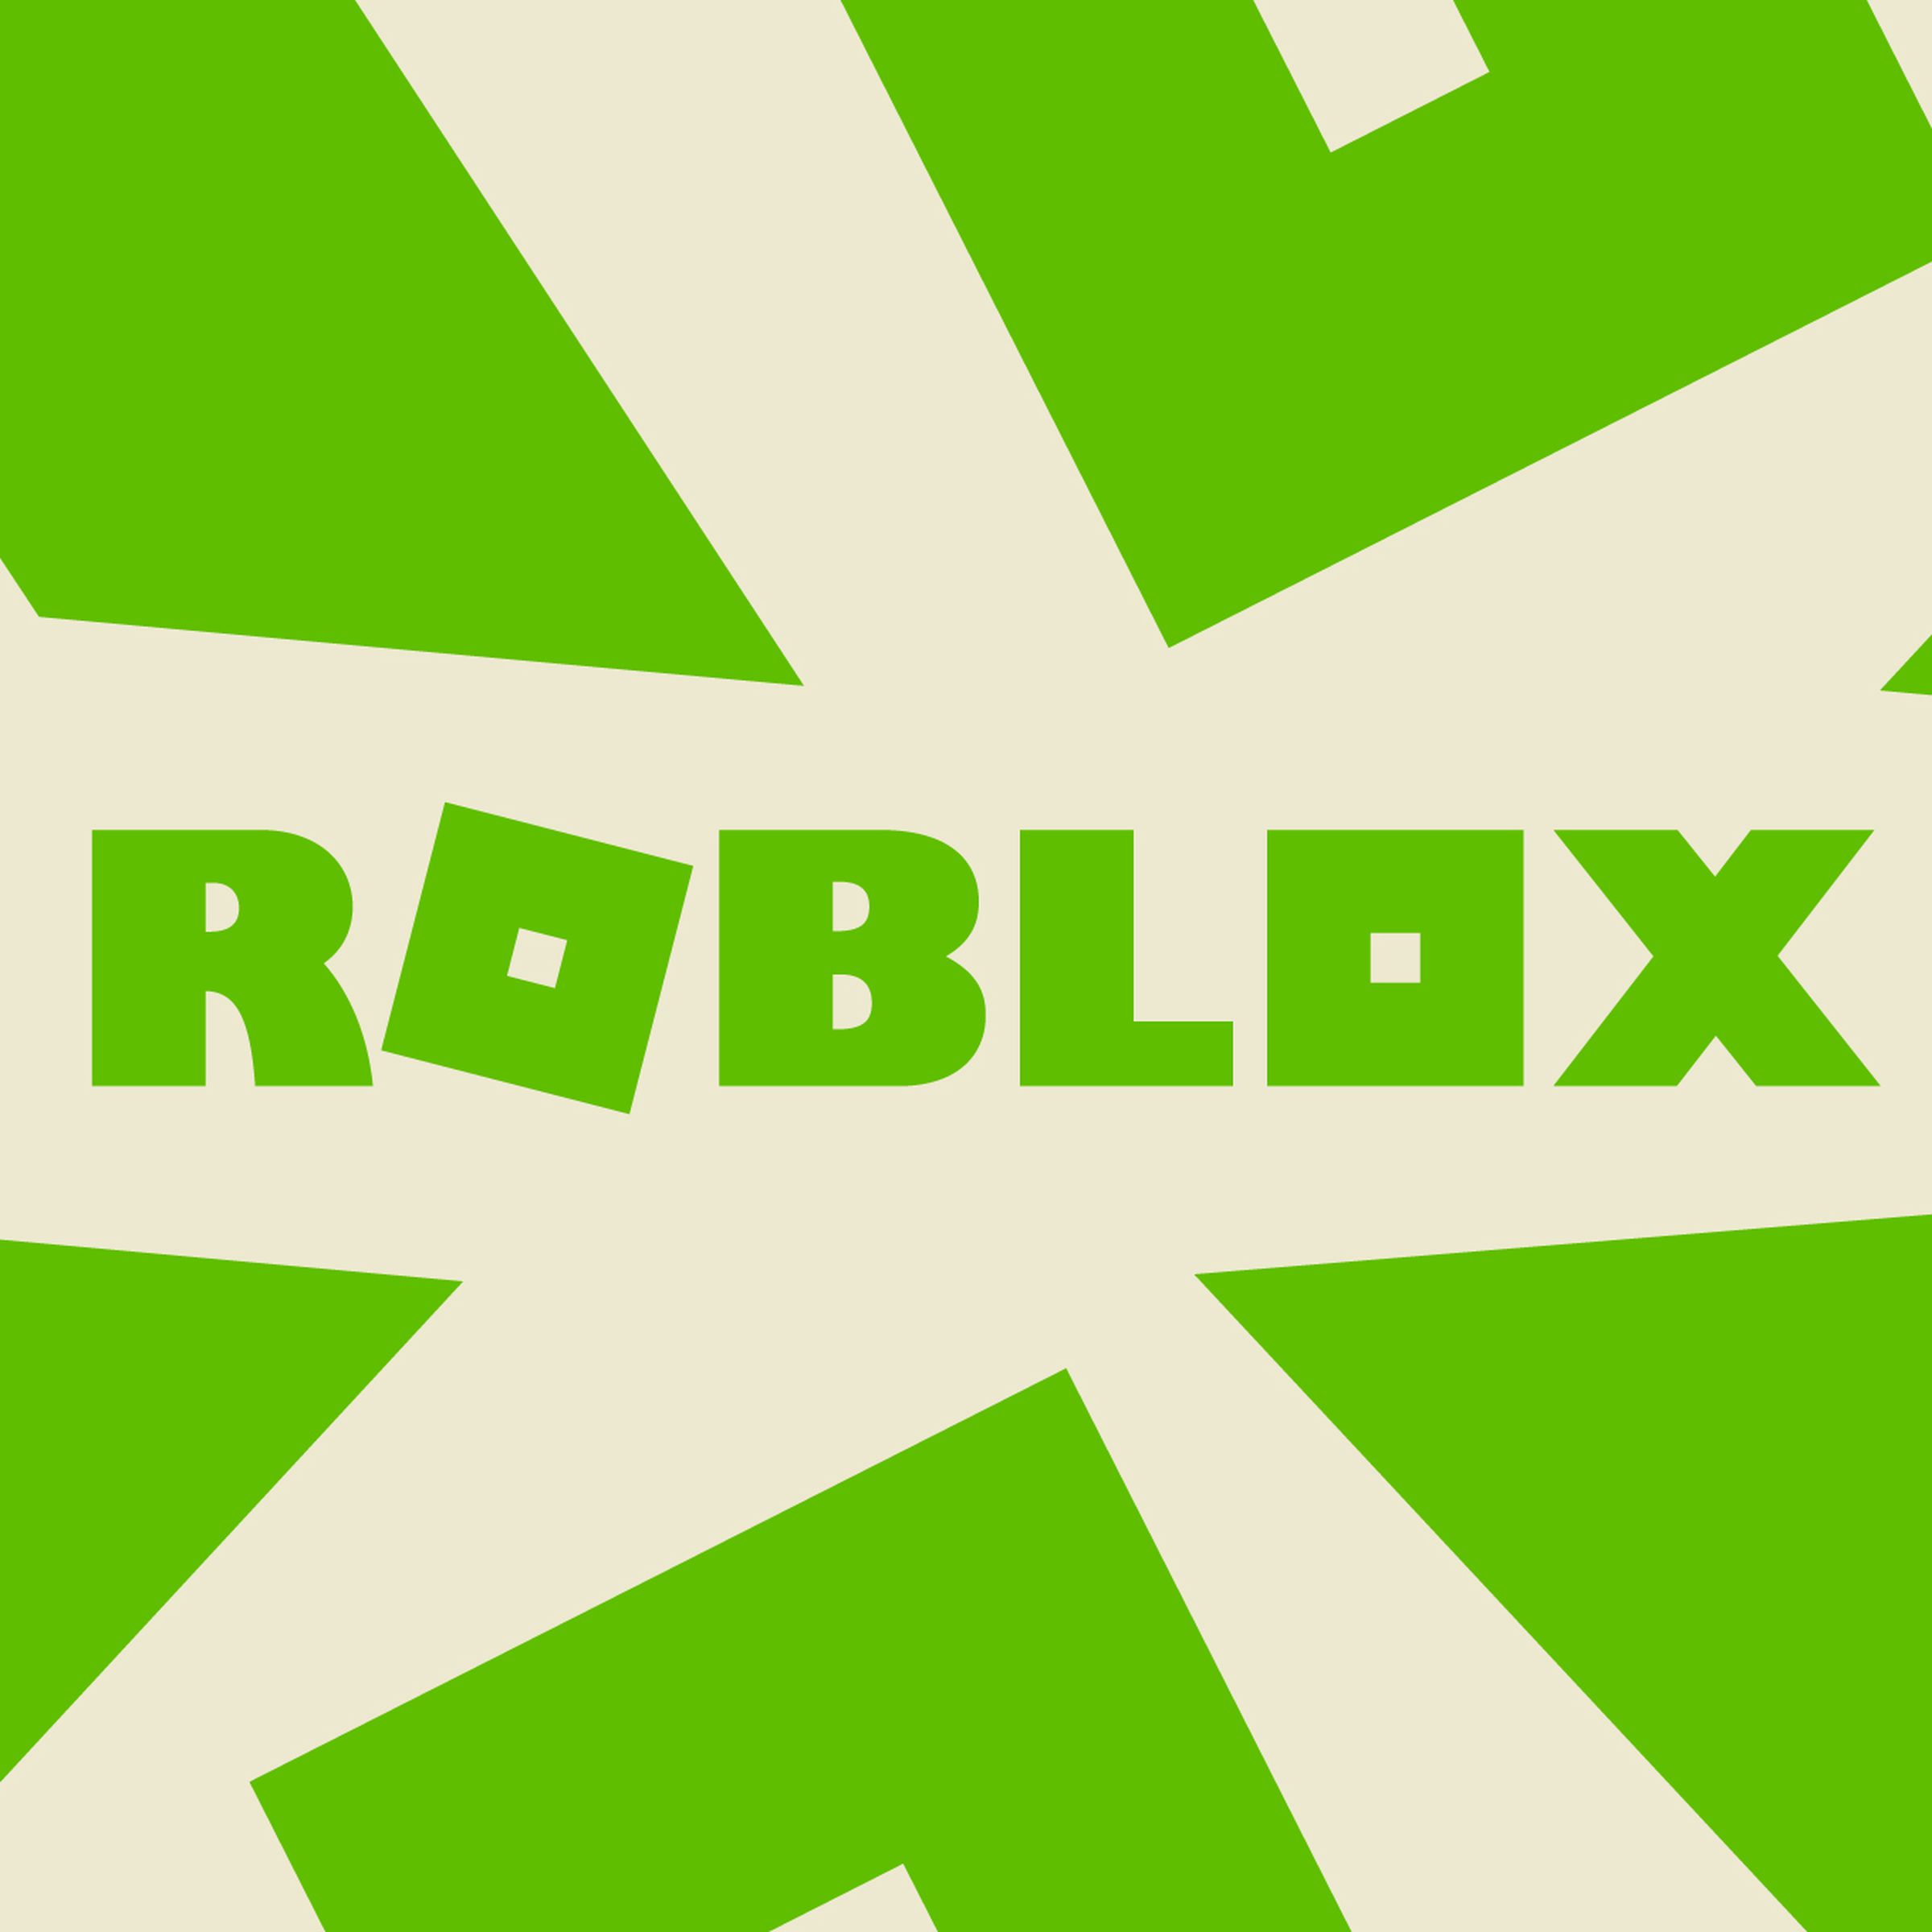 An illustration of the Roblox logo.